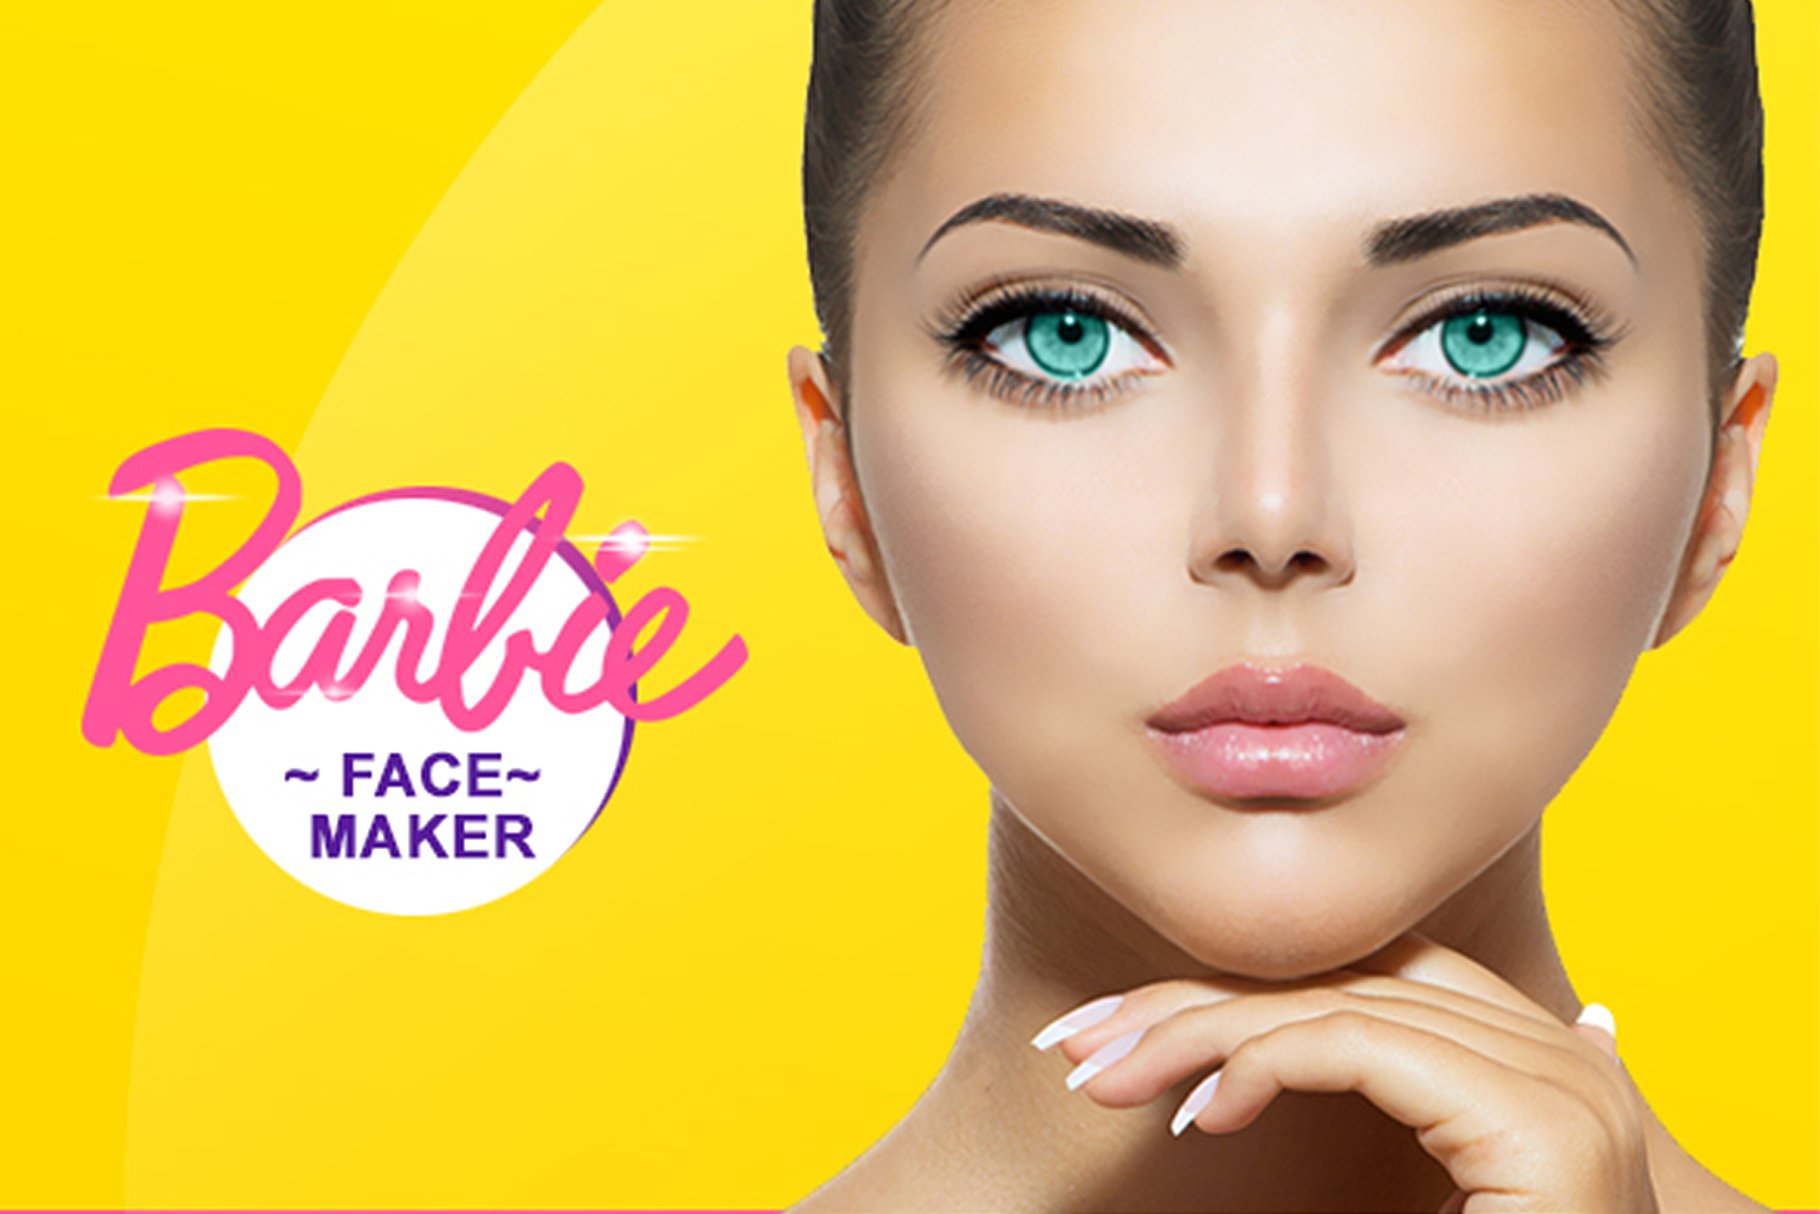 Barbie Face Maker PS Actioncover image.